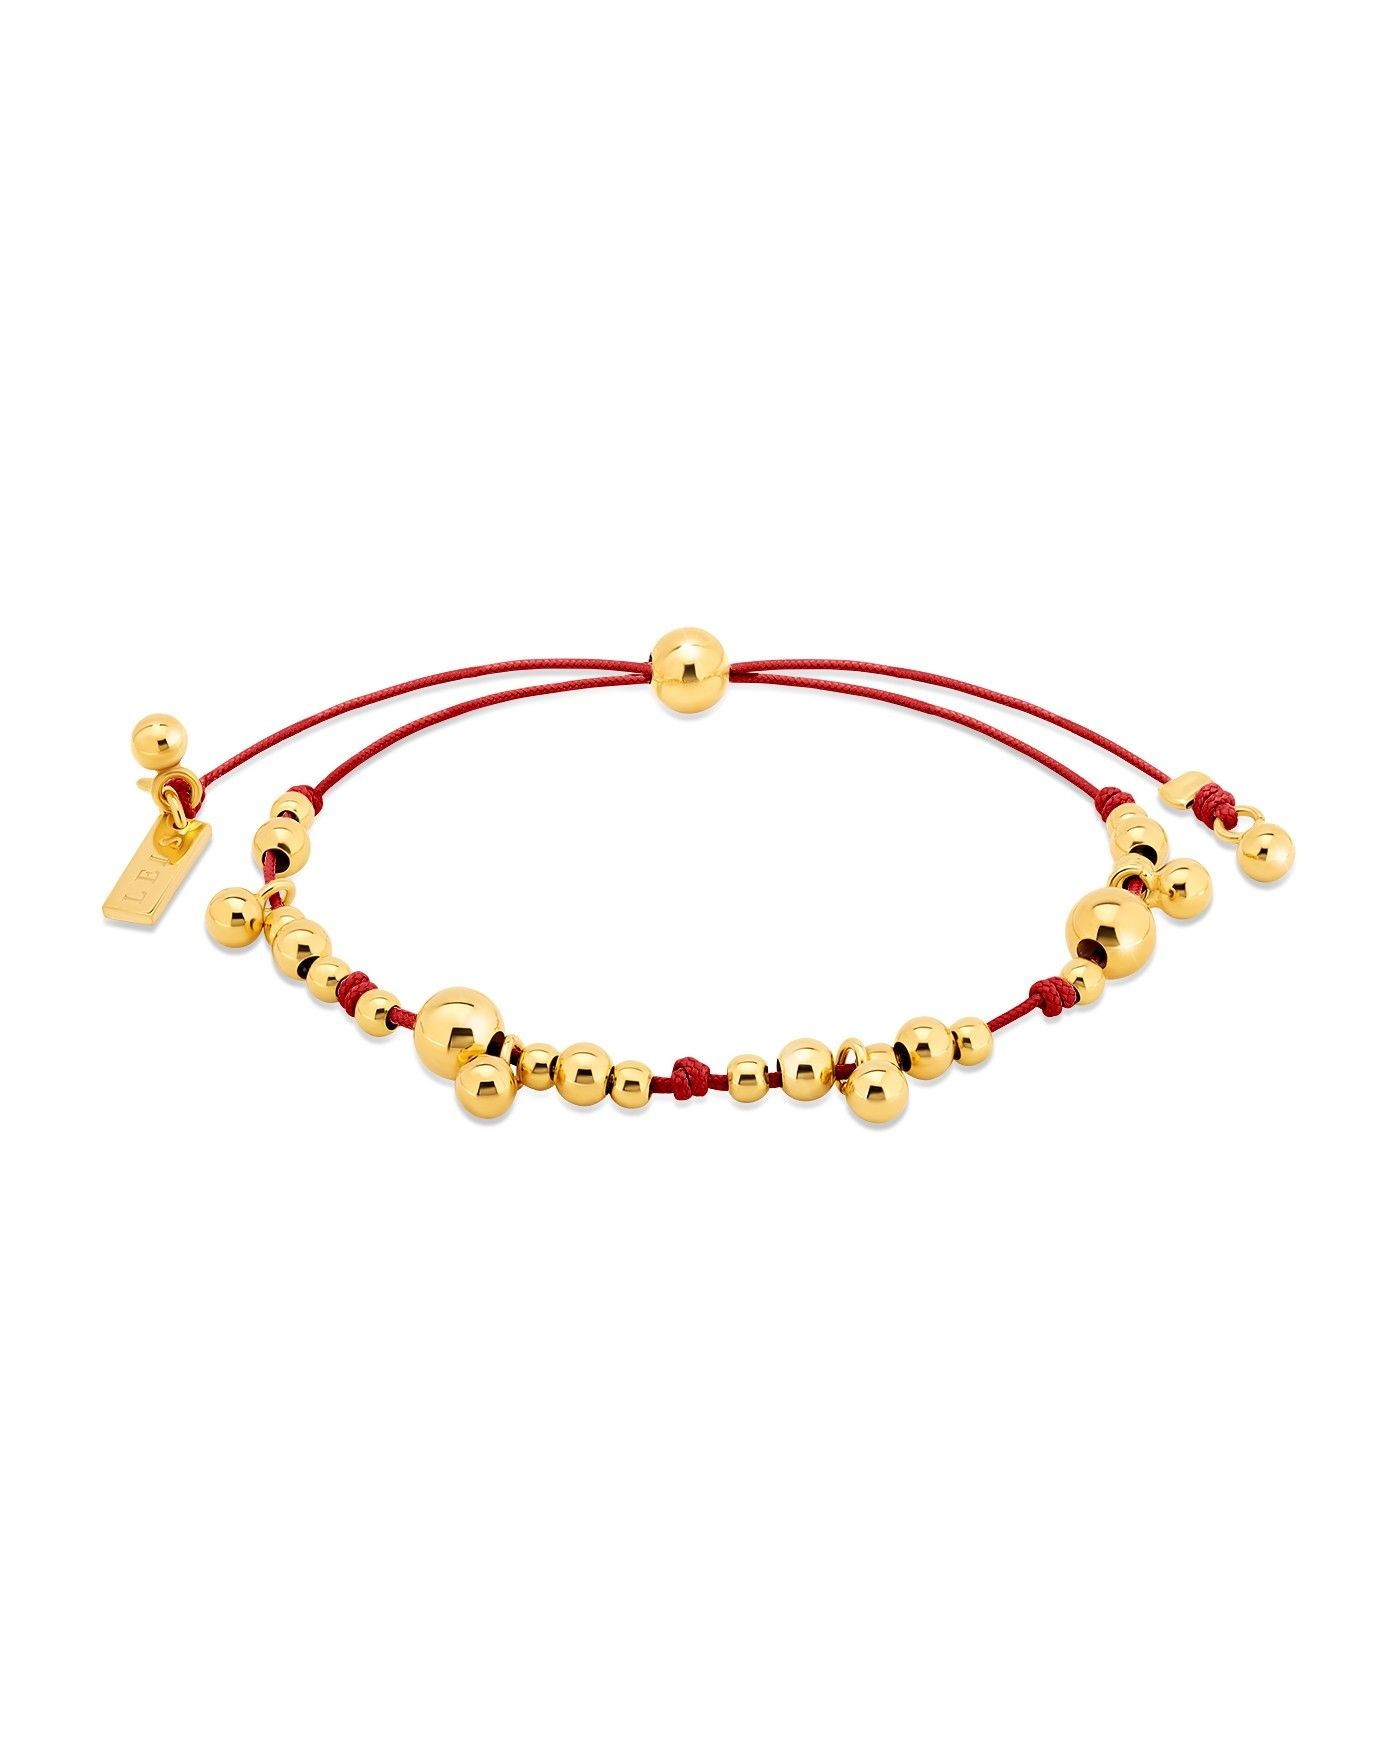 Amazon.com: 18K Solid Gold Bracelet for Women, Yellow Gold Diamond-cut  Beads Ball Bracelets Jewelry Mother's Day Gift for Mom, Wife, Girlfriend,  6.5